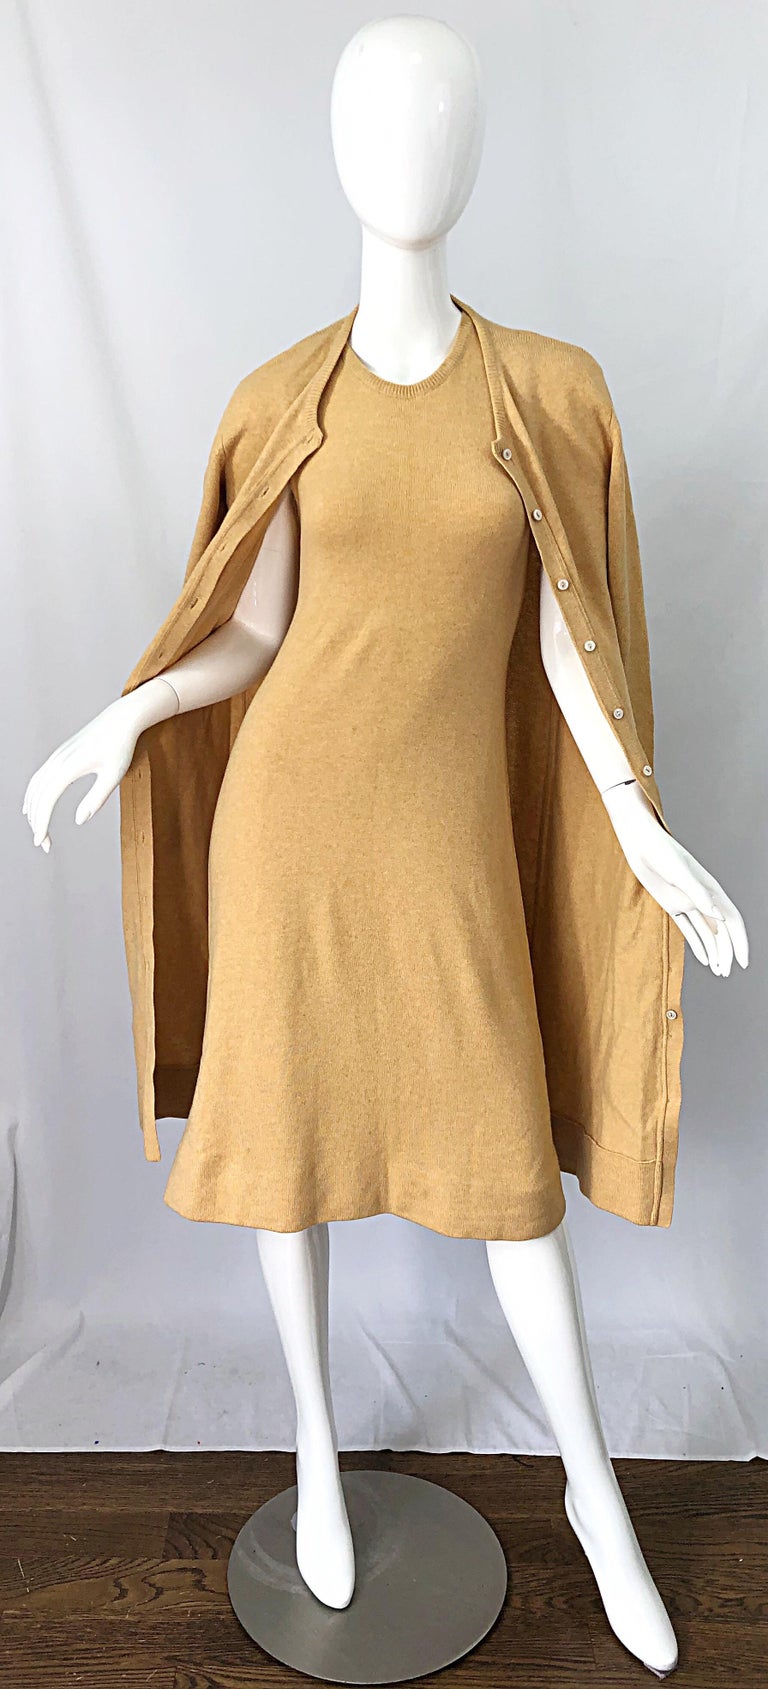 No one did cashmere or beading quite like HALSTON! This chic 1970s HALSTON ensemble consists of a long cashmere cardigan and sleeveless cashmere dress. Simply slips over the head and stretches to fit. Cardigan buttons up the front. Both pieces great